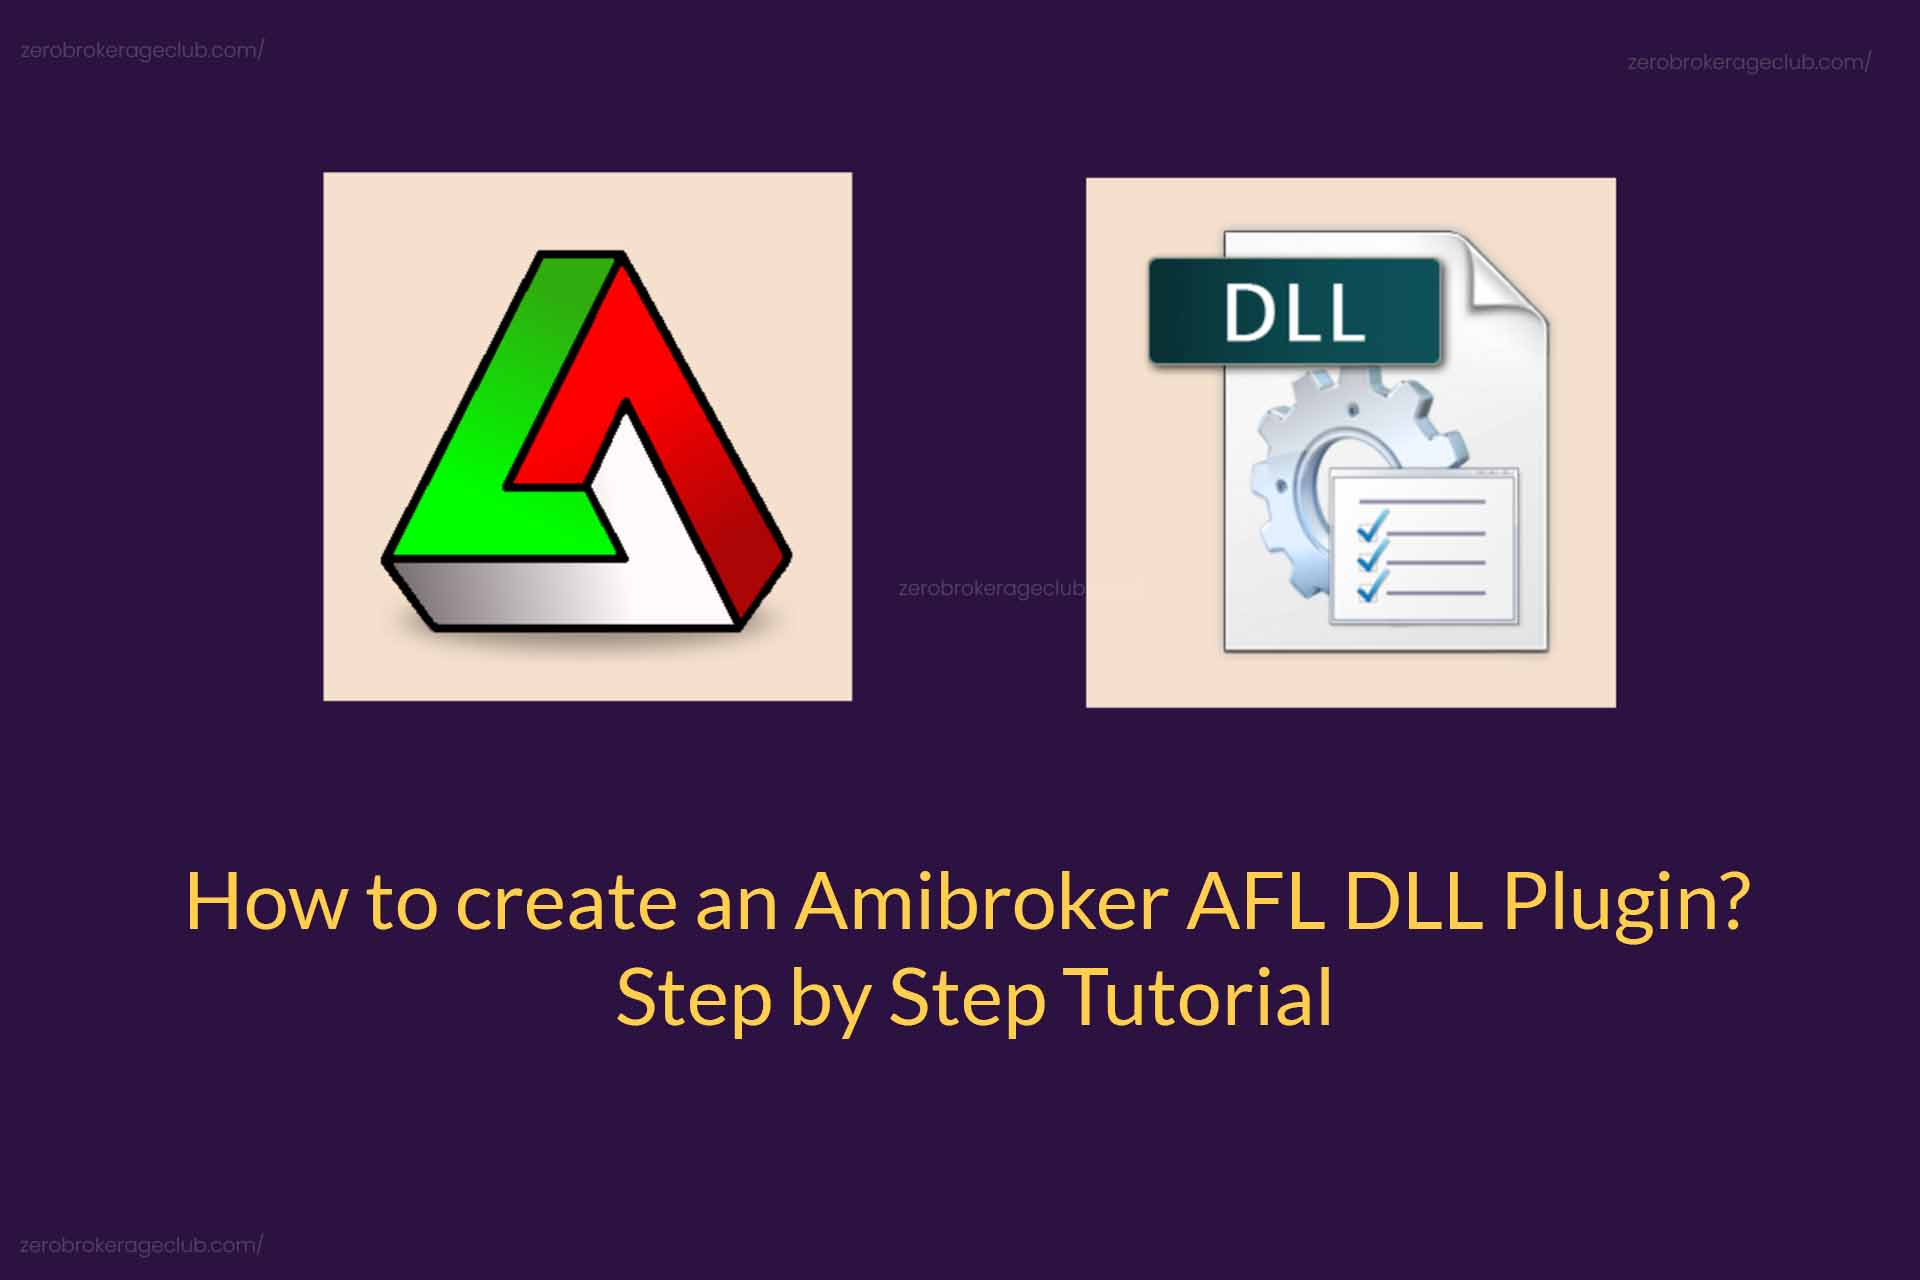 How to create an Amibroker AFL DLL Plugin? Step by Step Tutorial